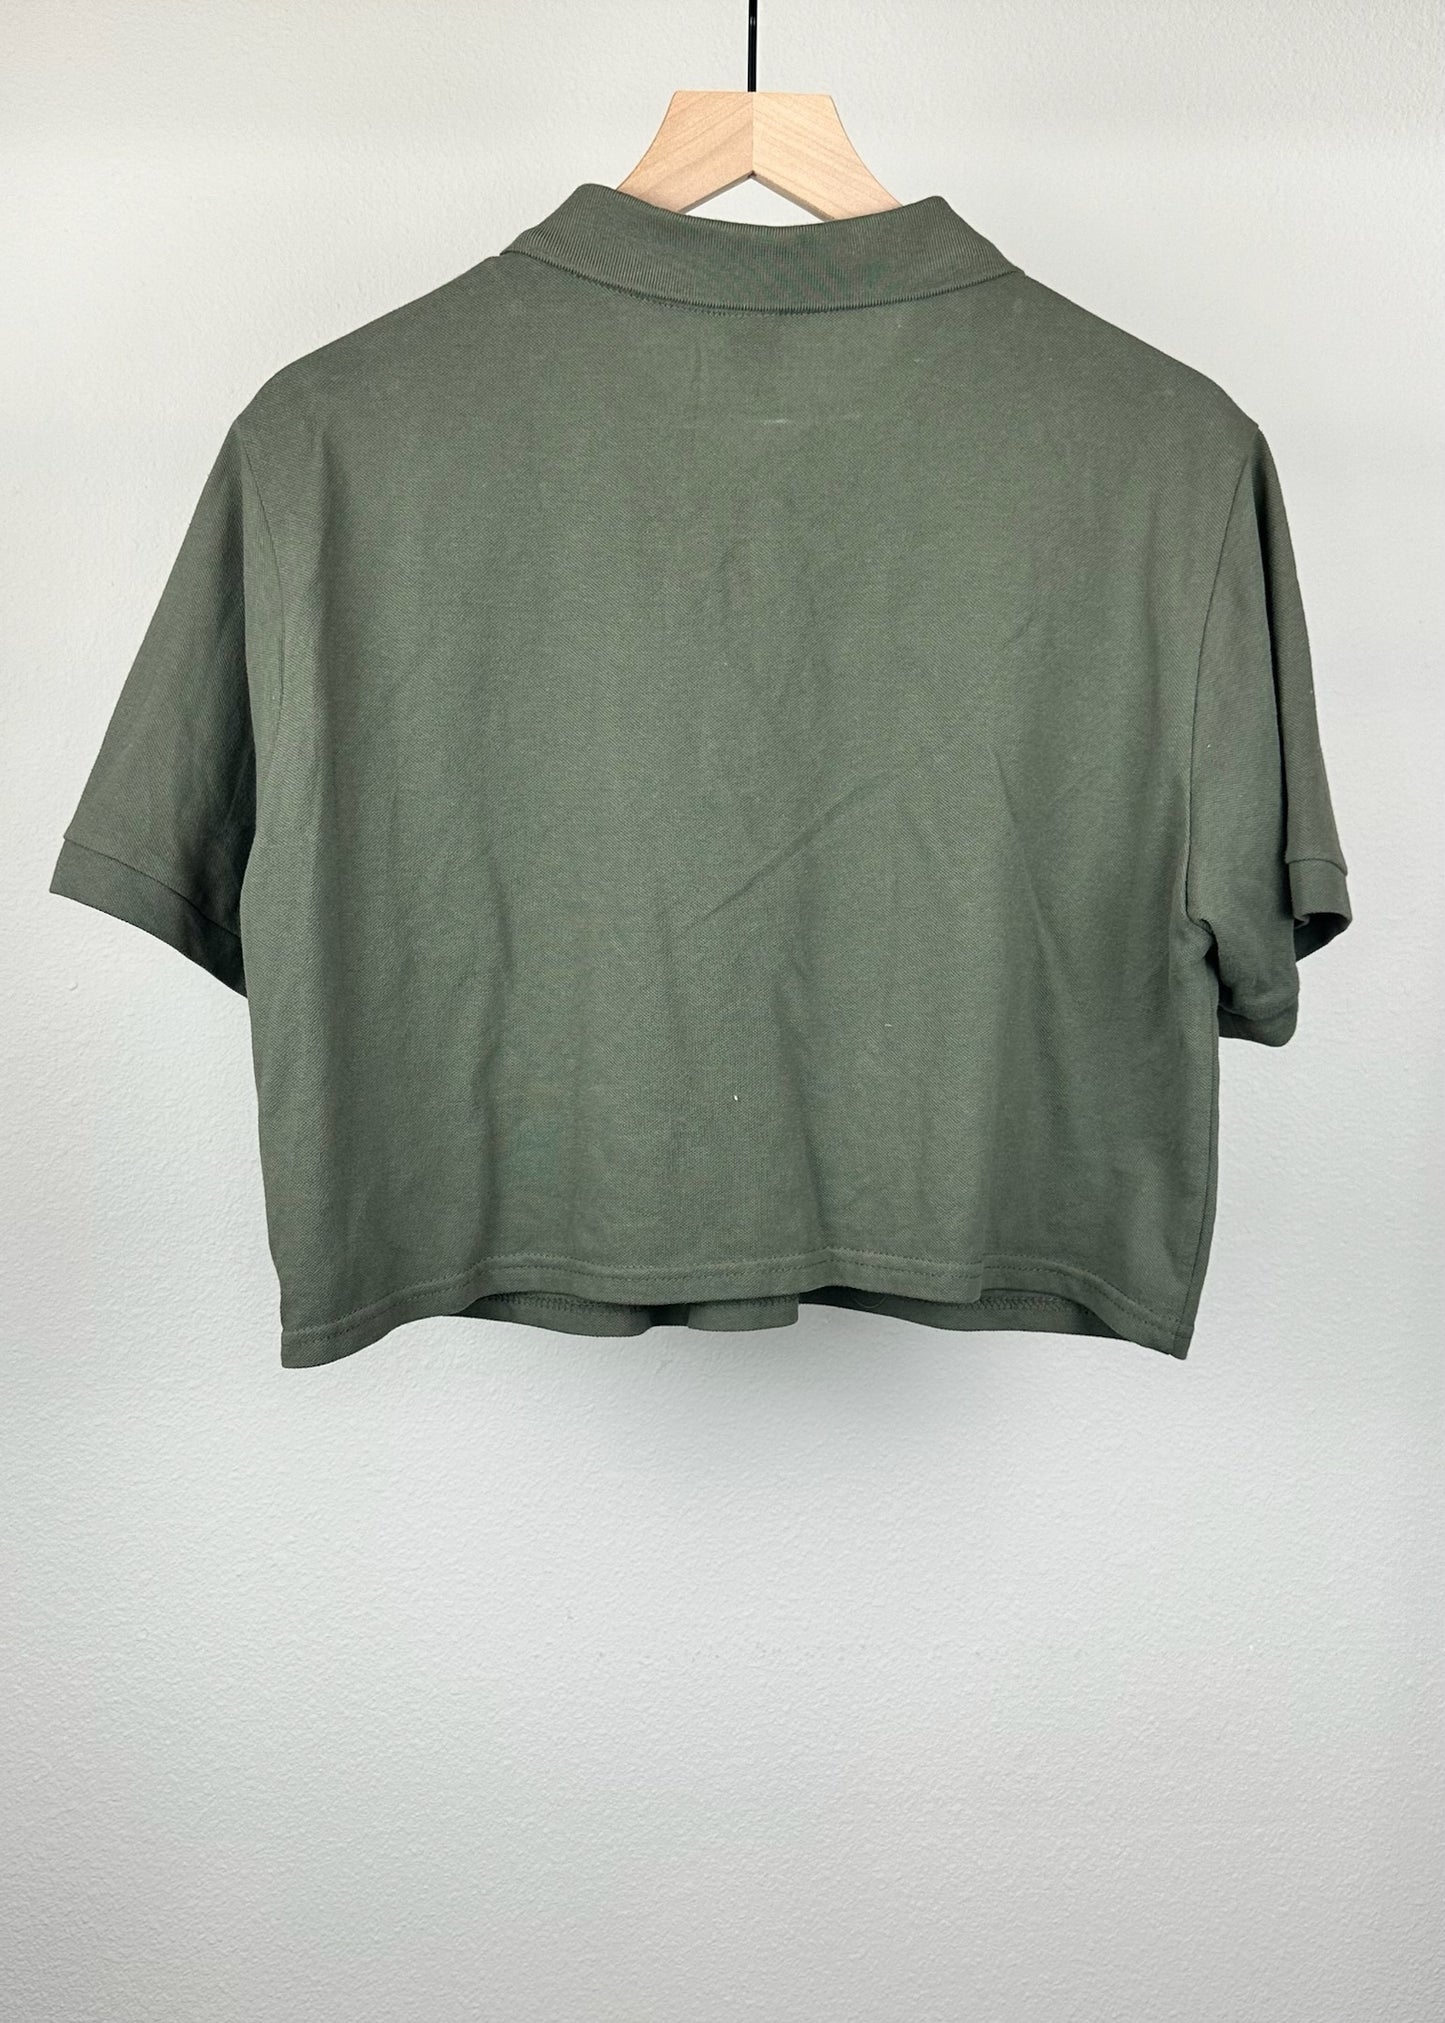 Olive Green Cropped Collar Shirt by Wild Fable